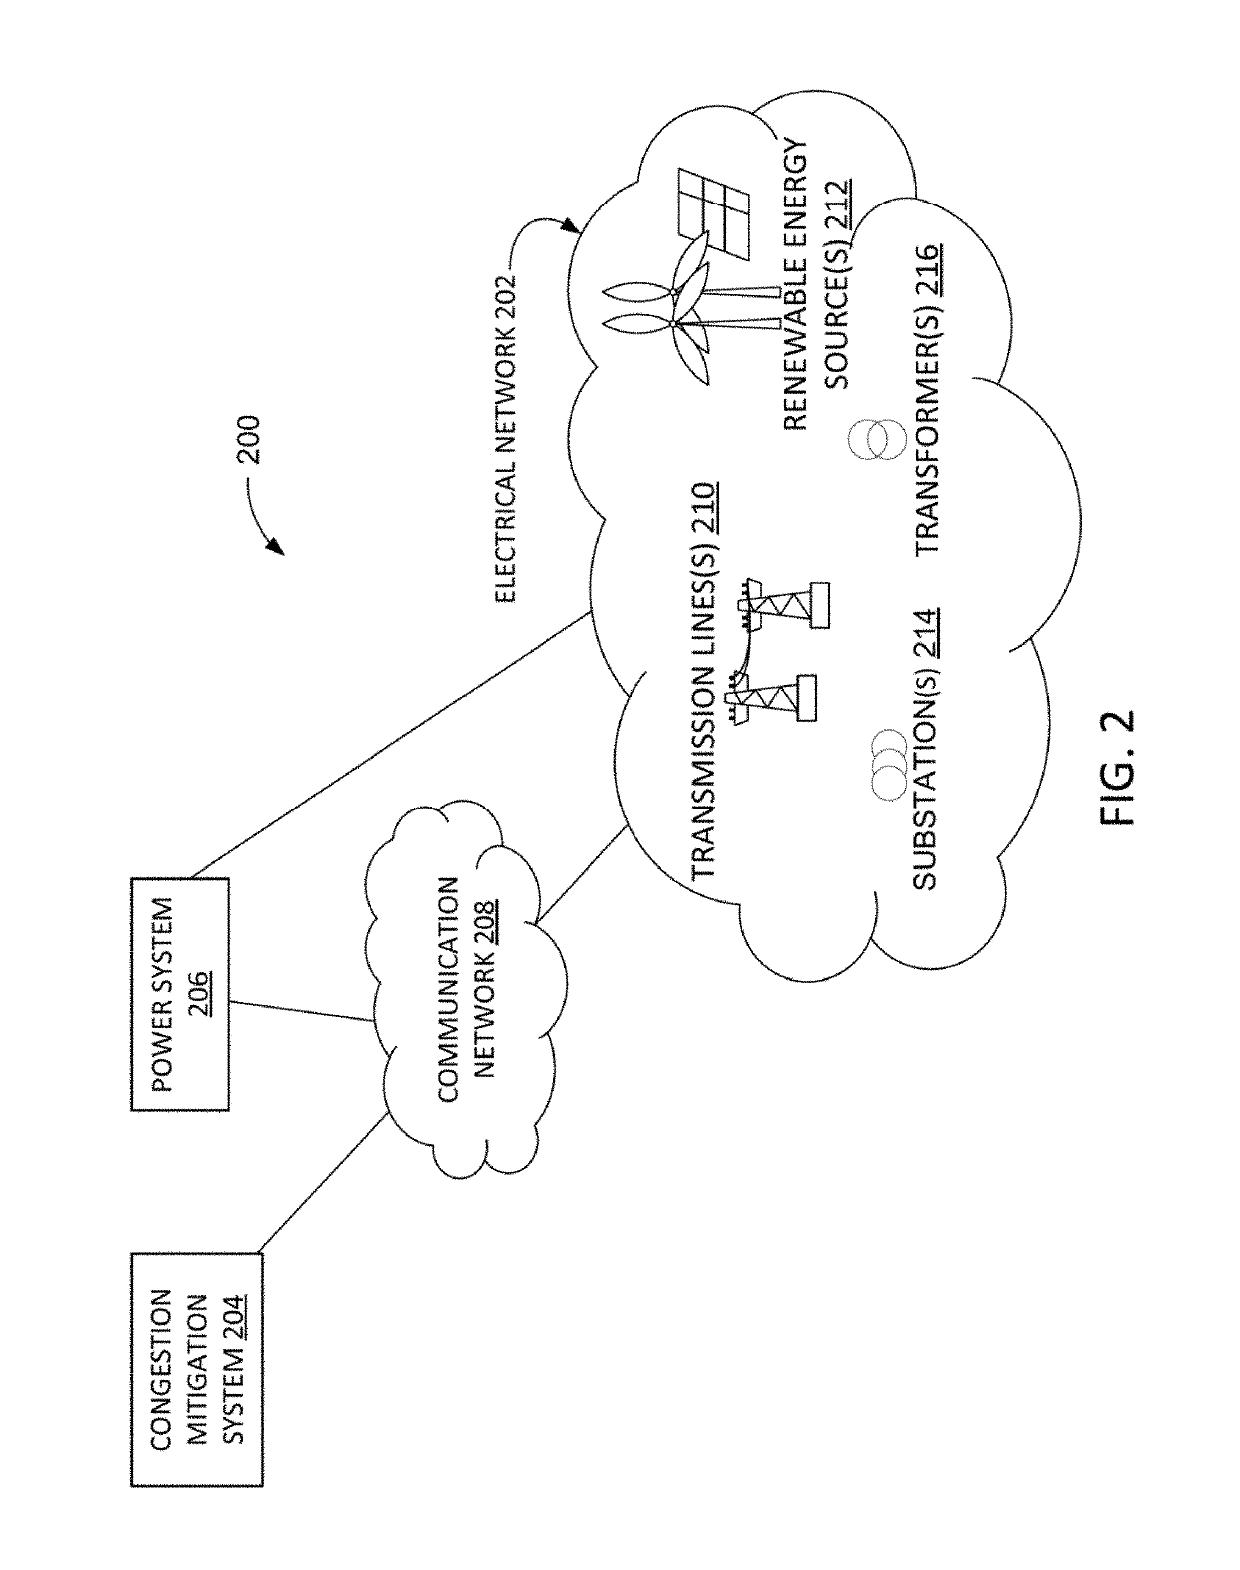 System and method for congestion forecasting in electrical networks